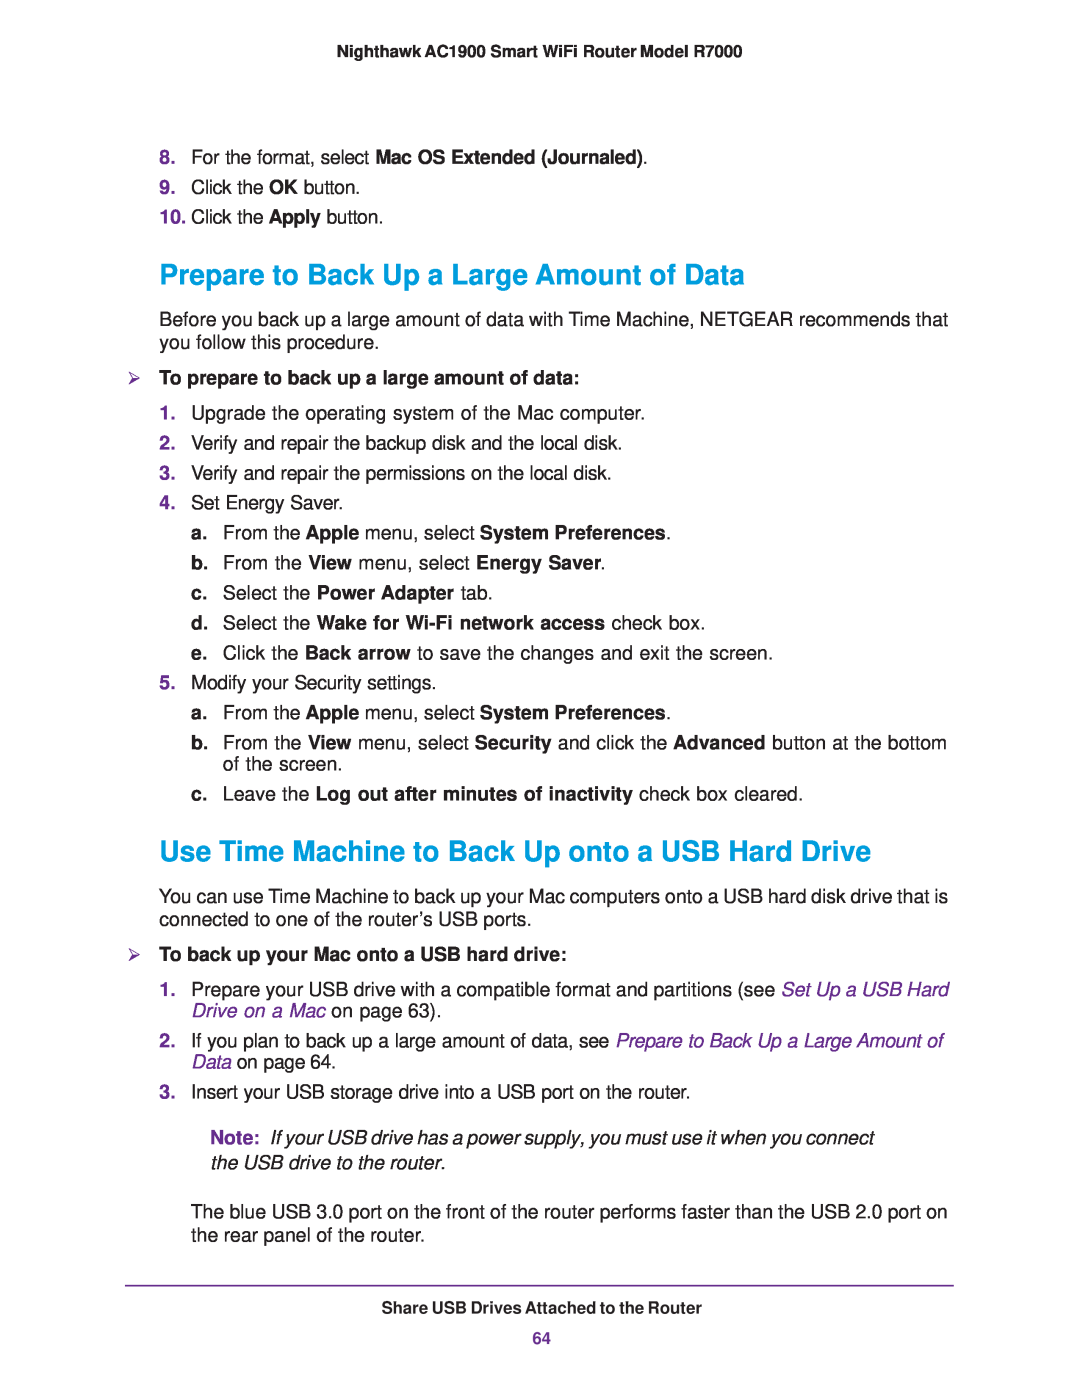 NETGEAR R7000 user manual Prepare to Back Up a Large Amount of Data, Use Time Machine to Back Up onto a USB Hard Drive 